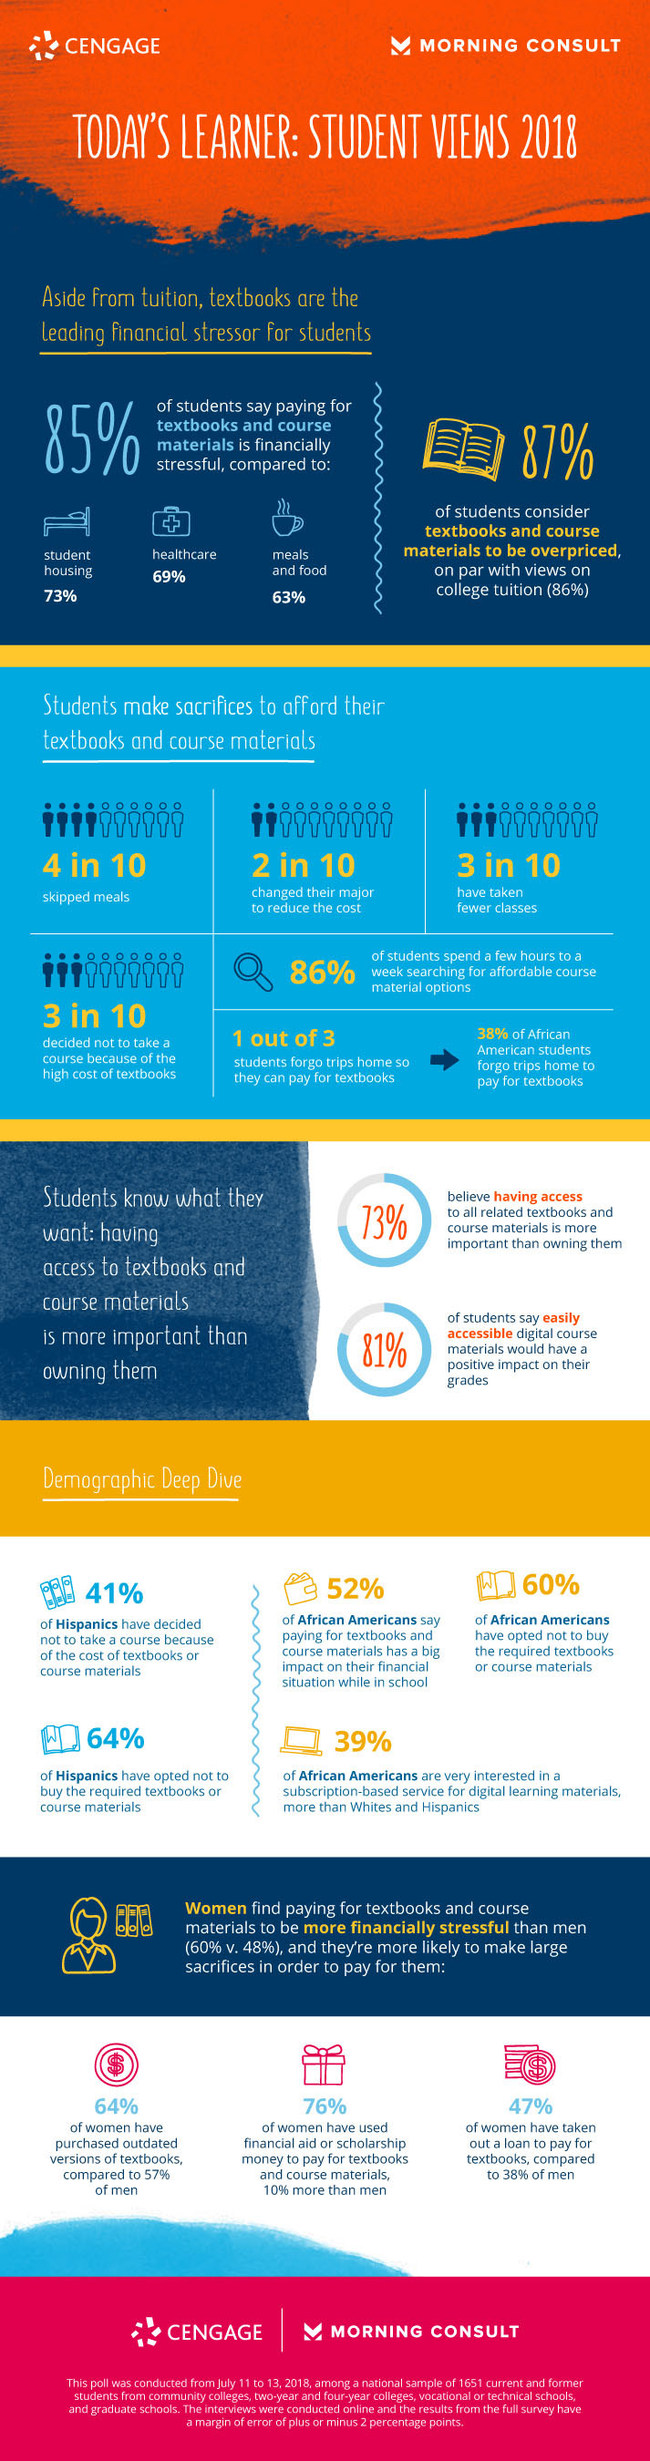 Today’s Learner: Student Views 2018 - Conducted by Morning Consult on behalf of Cengage